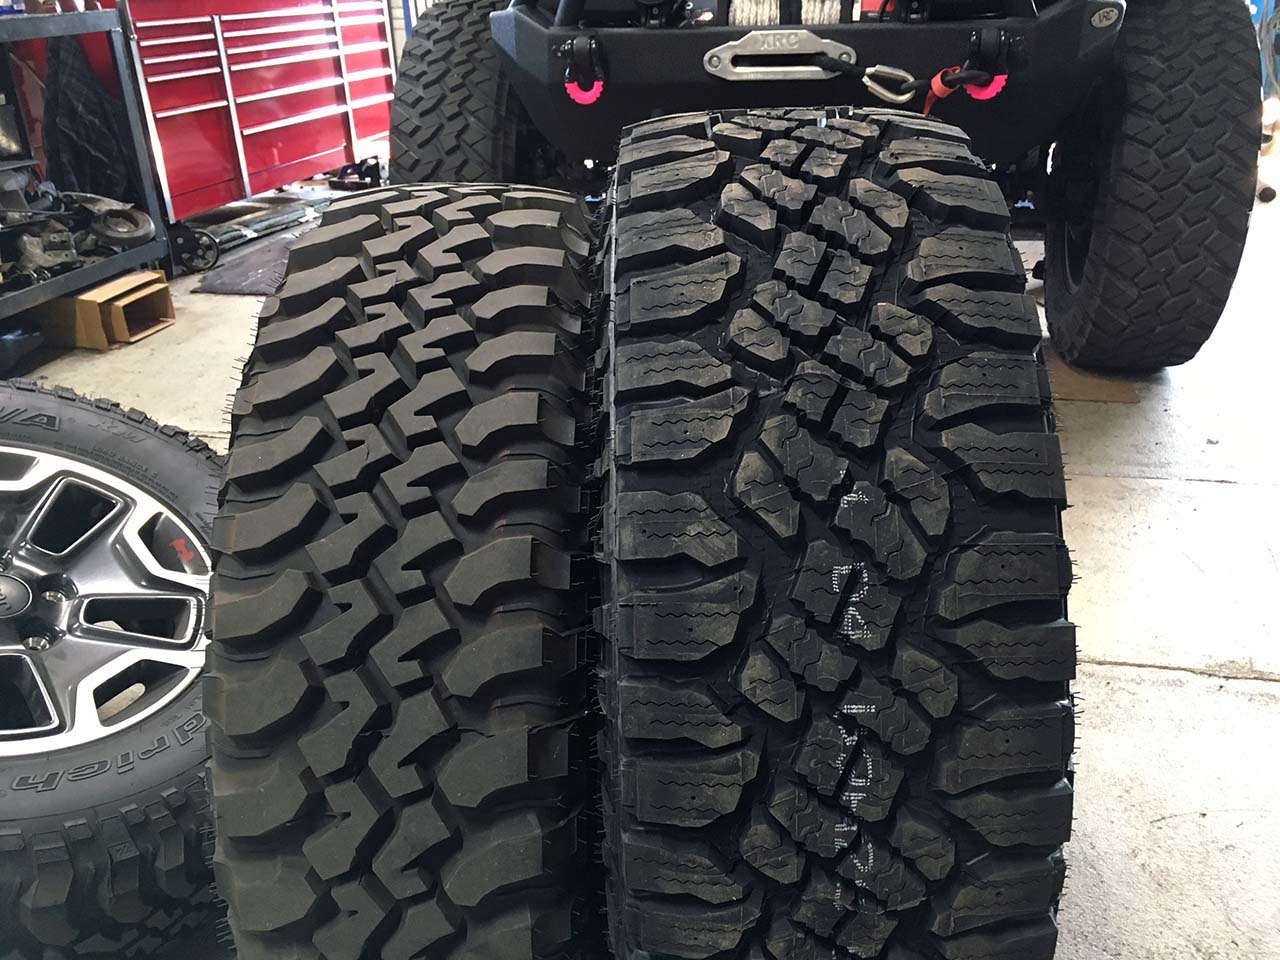 285/70R17 vs 315/70R17: Comparing Tire Sizes for Off-Road Performance